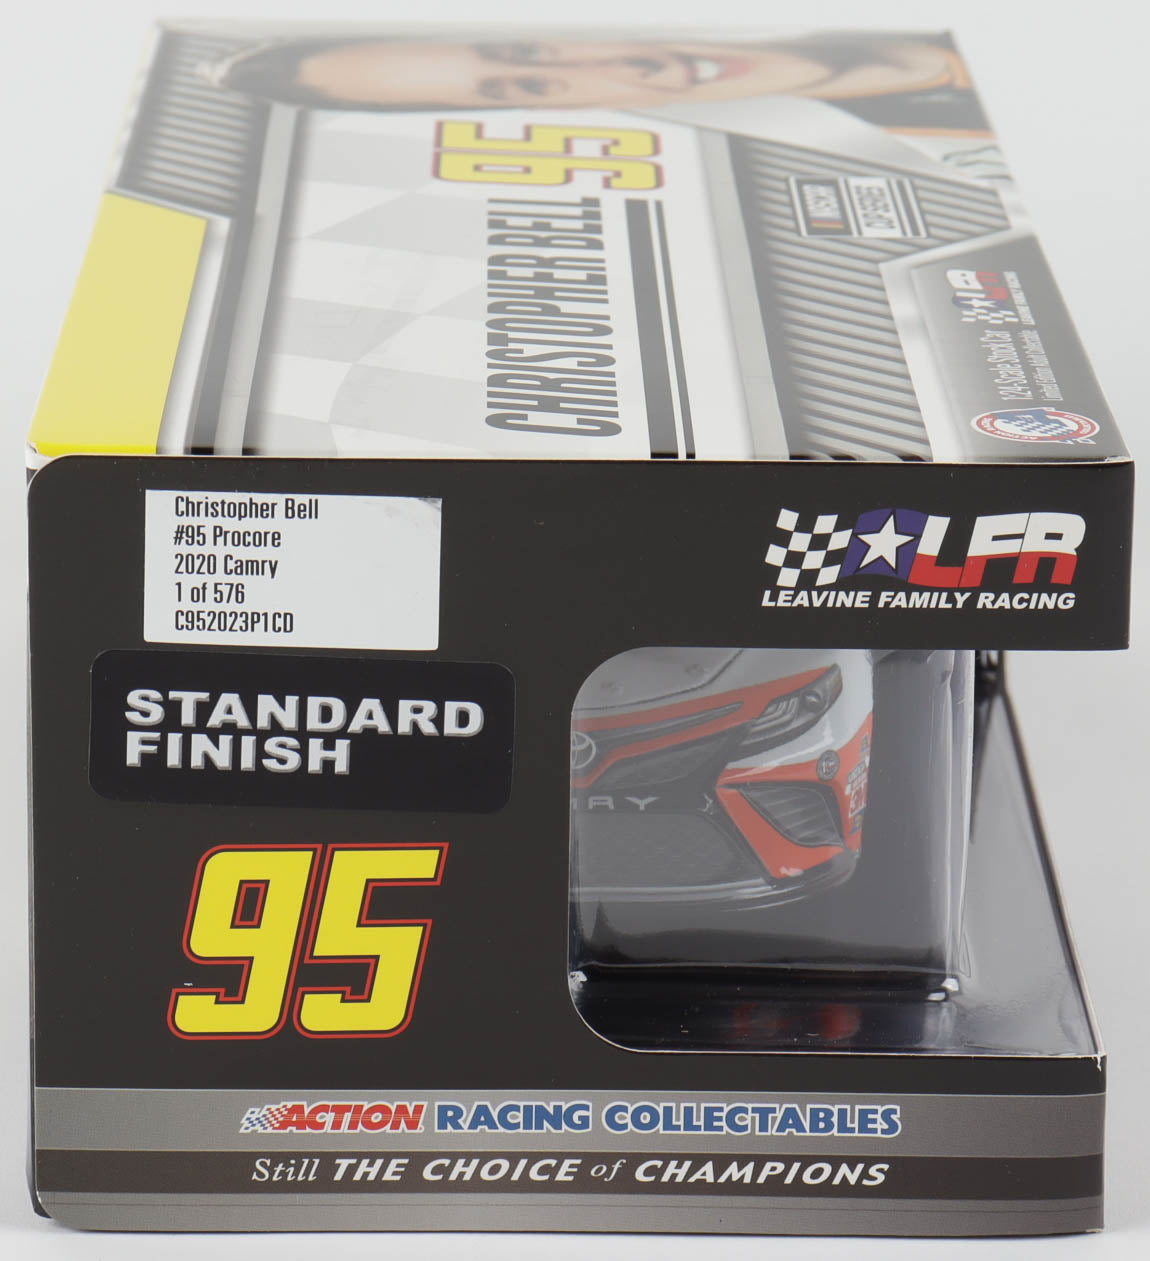 Christopher Bell Signed 2020 NASCAR #95 Procore - 1:24 Premium Action Diecast Car (PA COA) - 1 of 576 - NASCAR Cup Series Rookie Car - PristineMarketplace